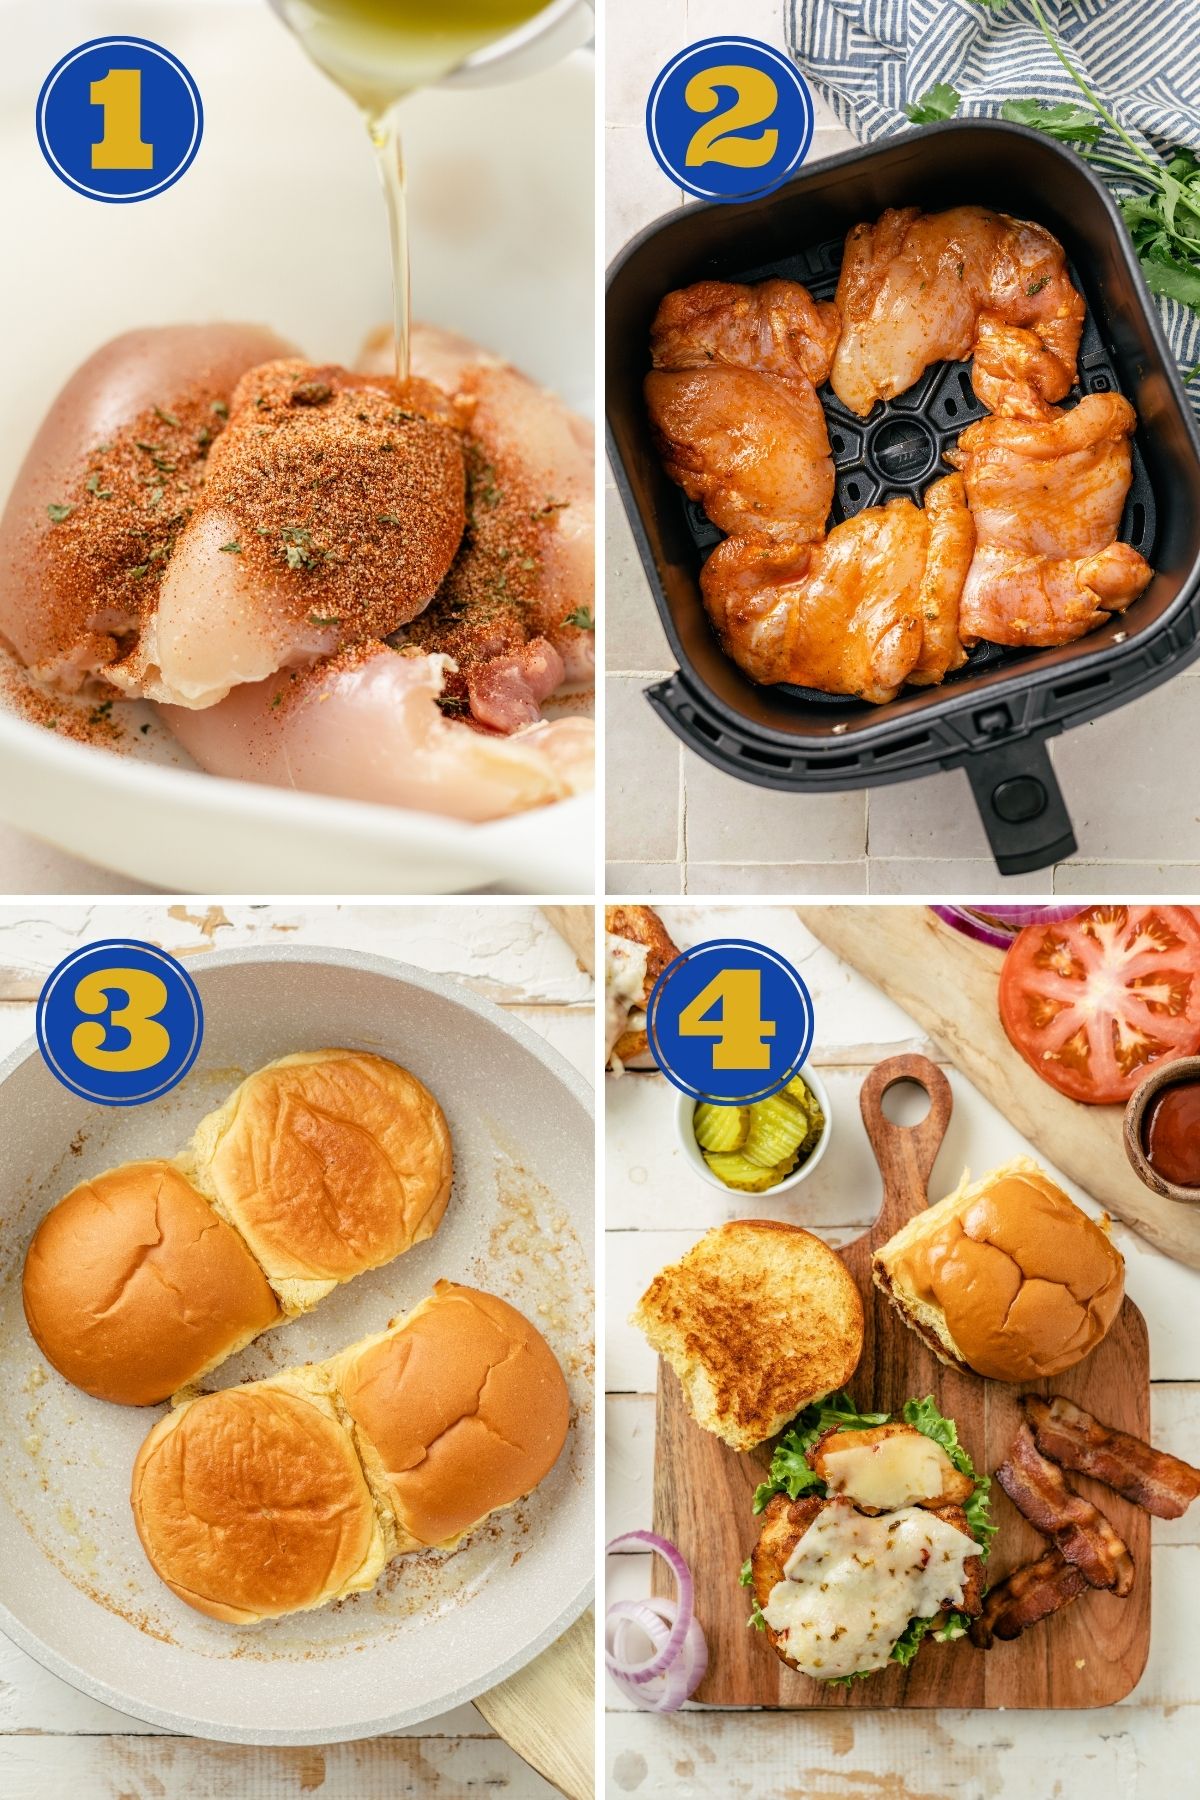 4 steps to make Cajun Chicken sandwiches with air fryer cajun chicken thighs or chicken breasts and toppings